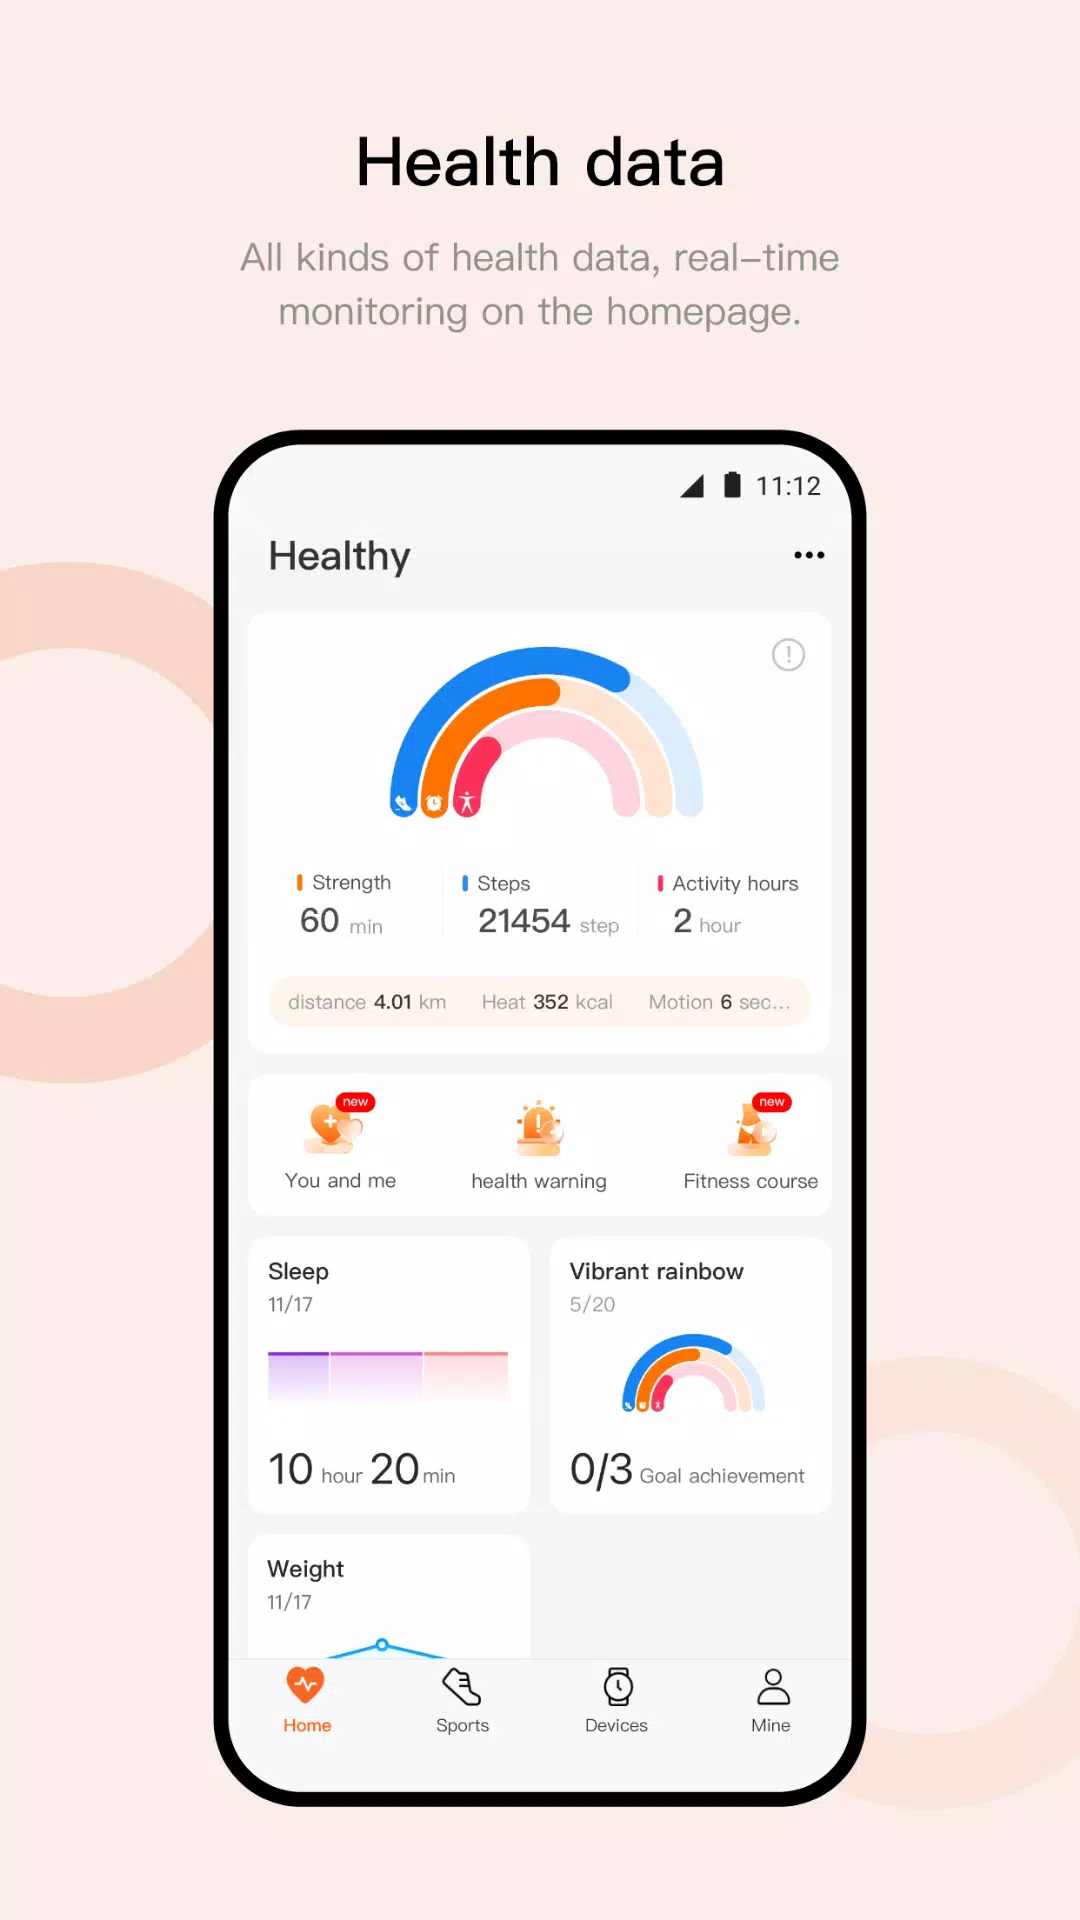 Health & Fitness-RevDL  Download Apk Mod Games and Apps Pro Apk Android